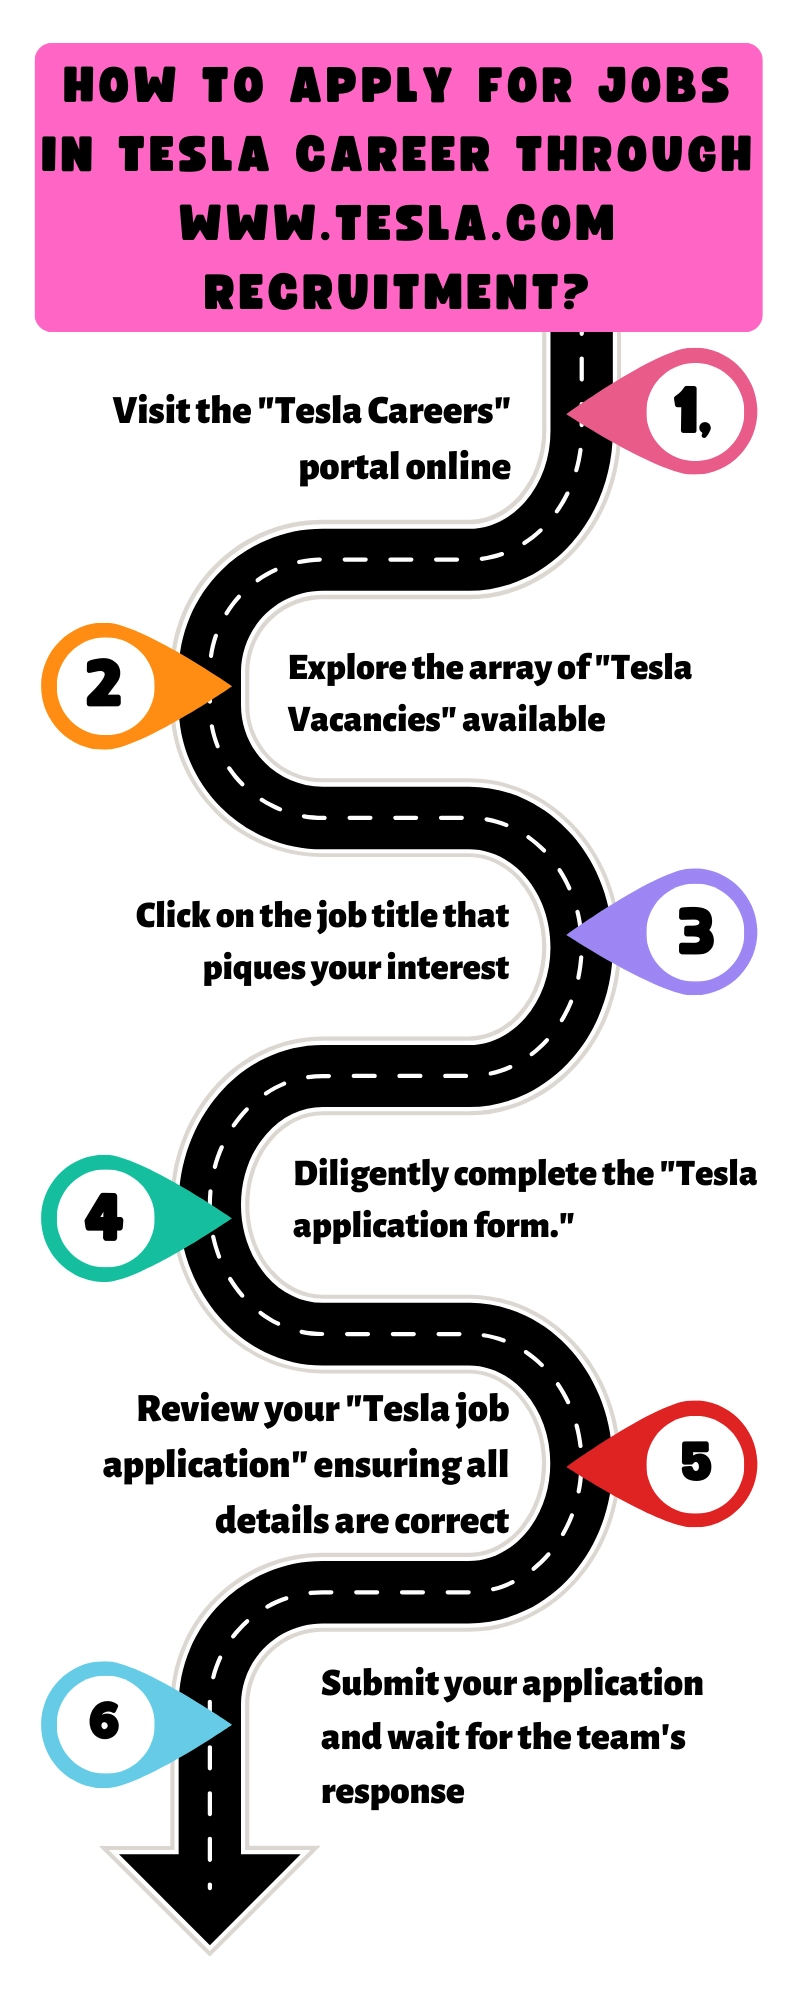 How to Apply for Jobs in Tesla Career through www.tesla.com recruitment?